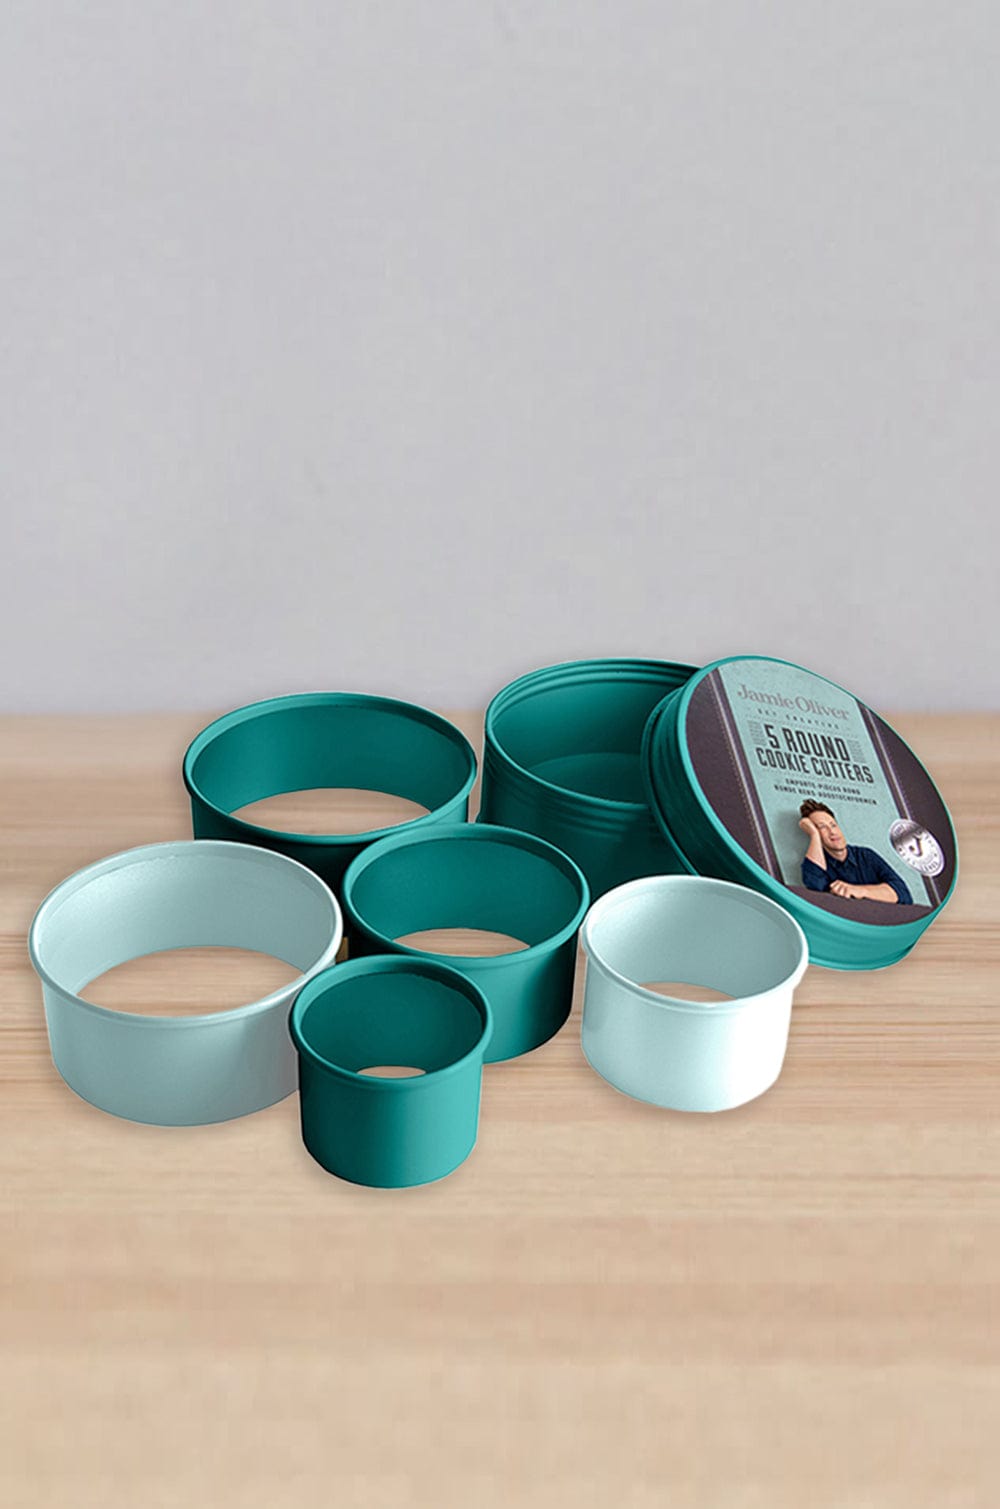 Jamie Oliver Round Cookie Cutters- Set of 5 - Atlantic Green